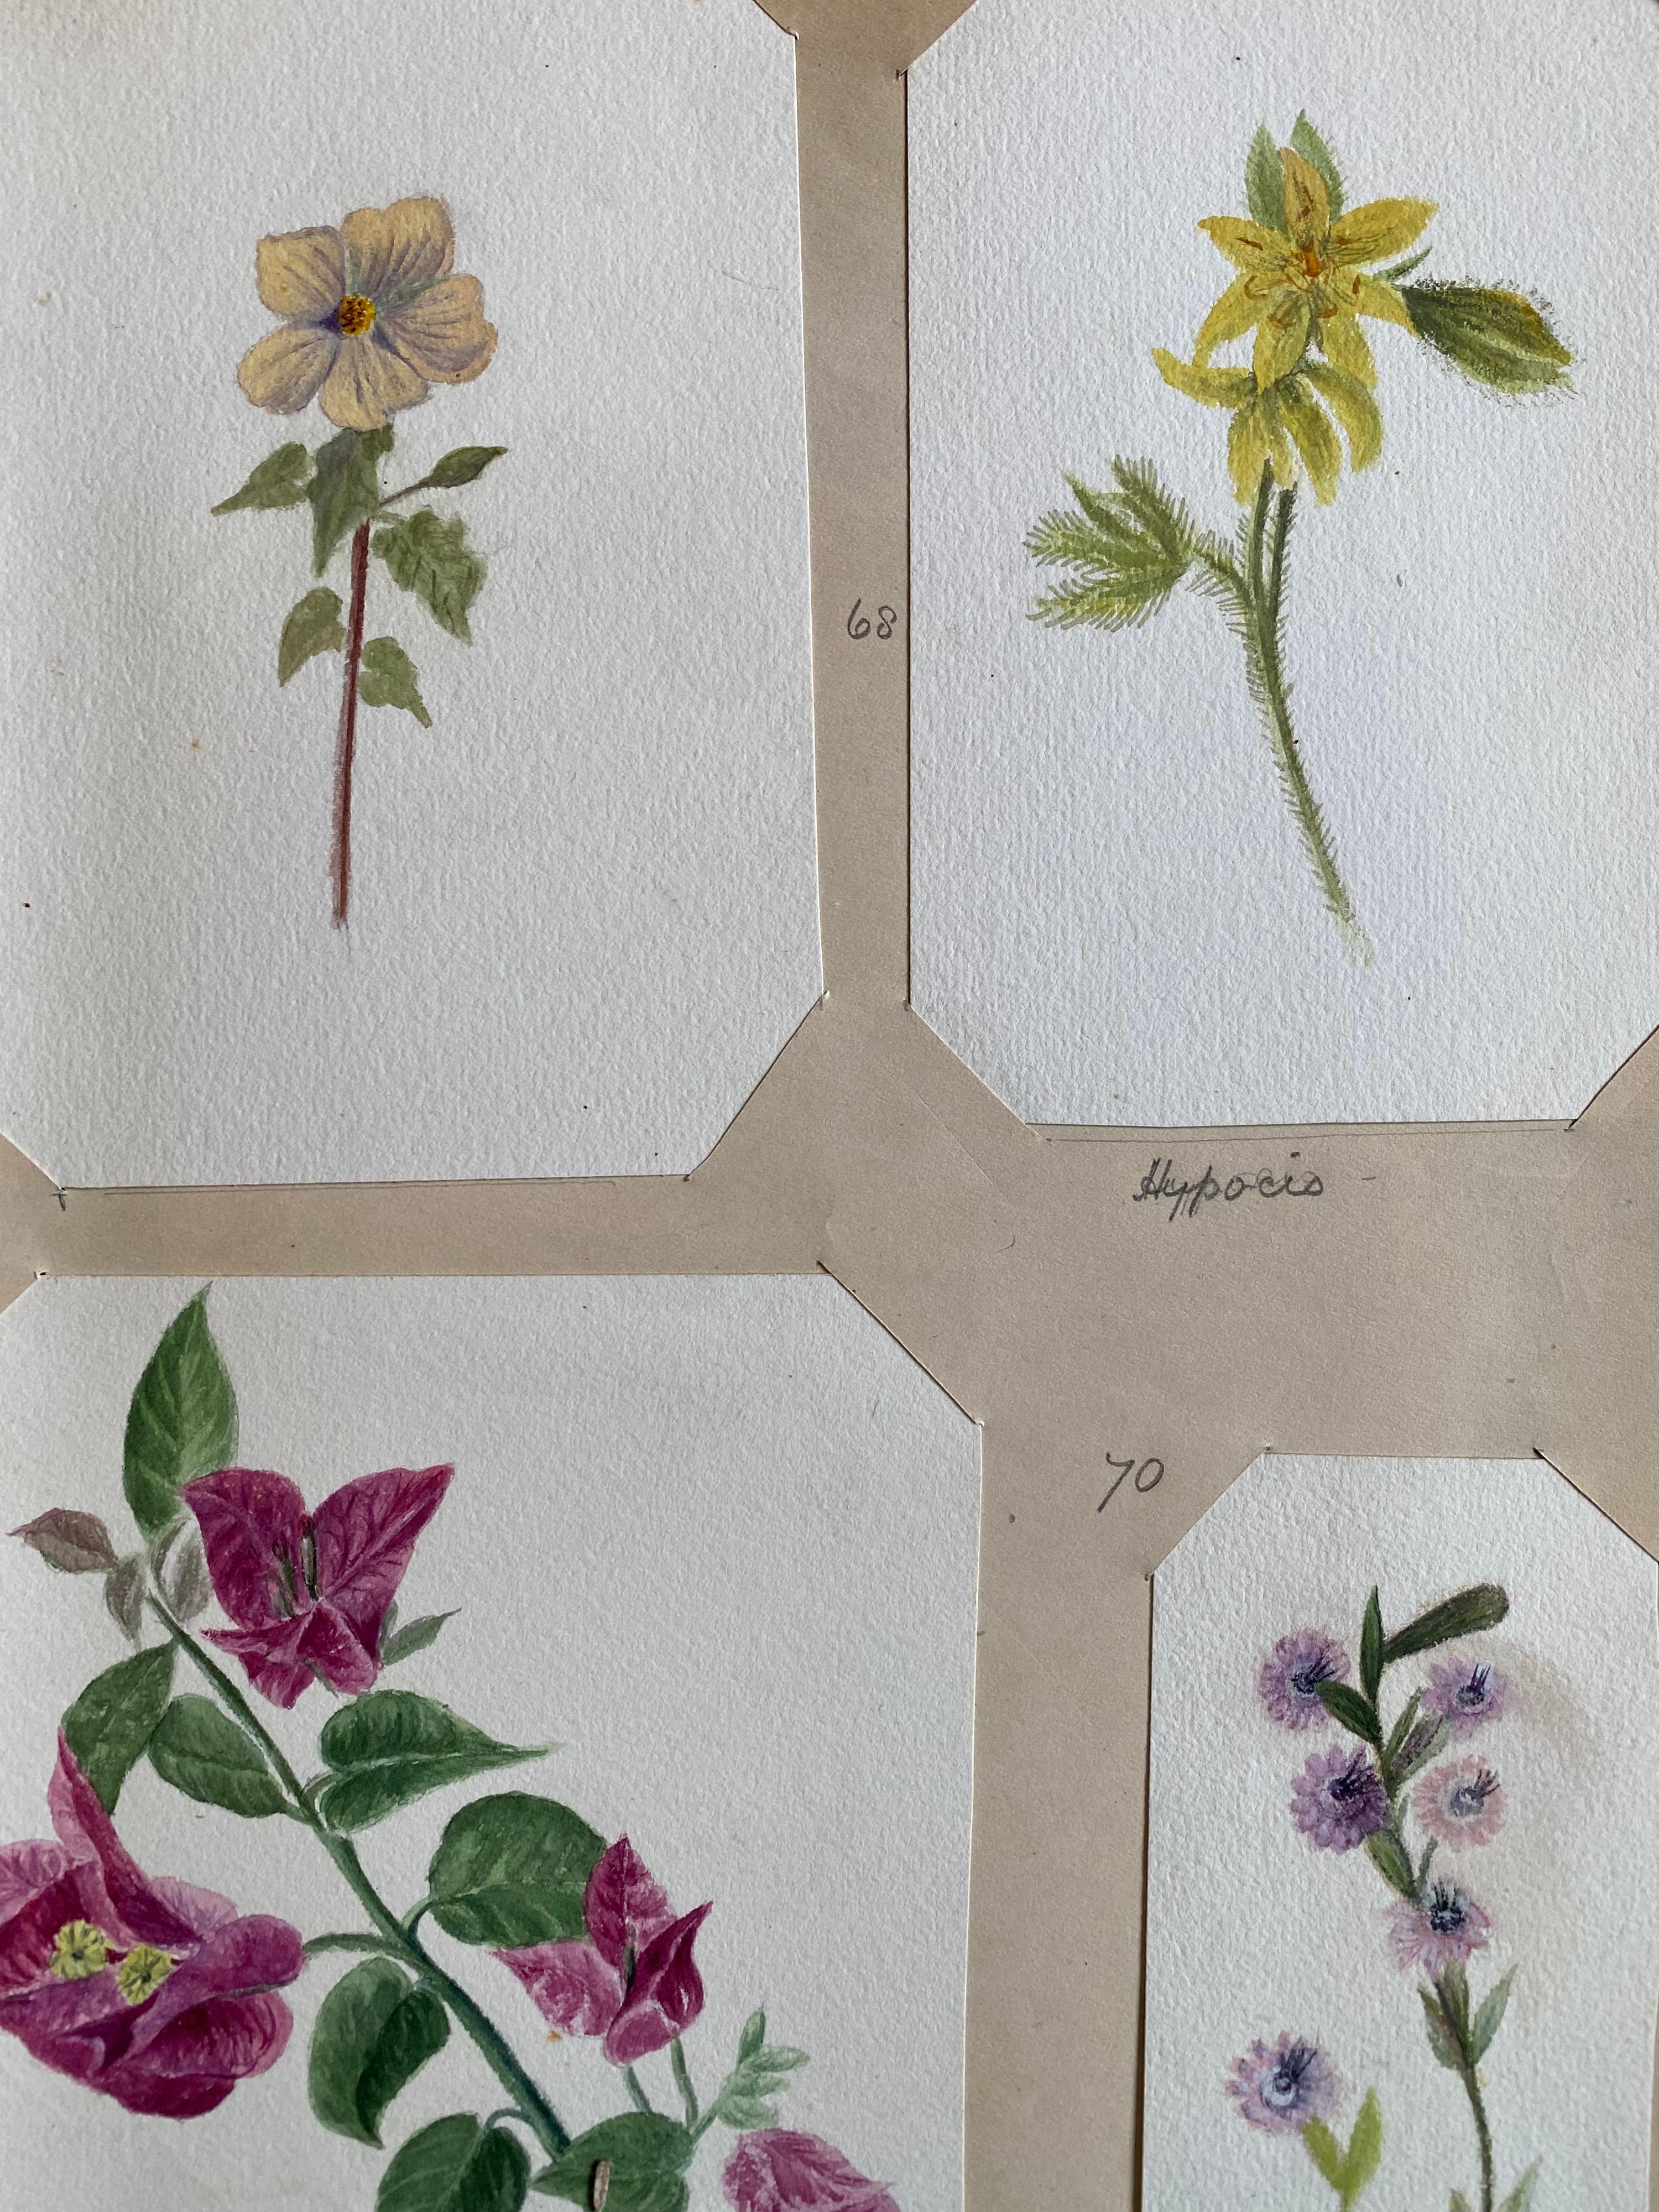 Set of four very fine original antique English botanical watercolour paintings depicting this beautiful depiction of a flower/ plant. The work came to us from a private collection in Surrey, England and had been part of an album of works assembled